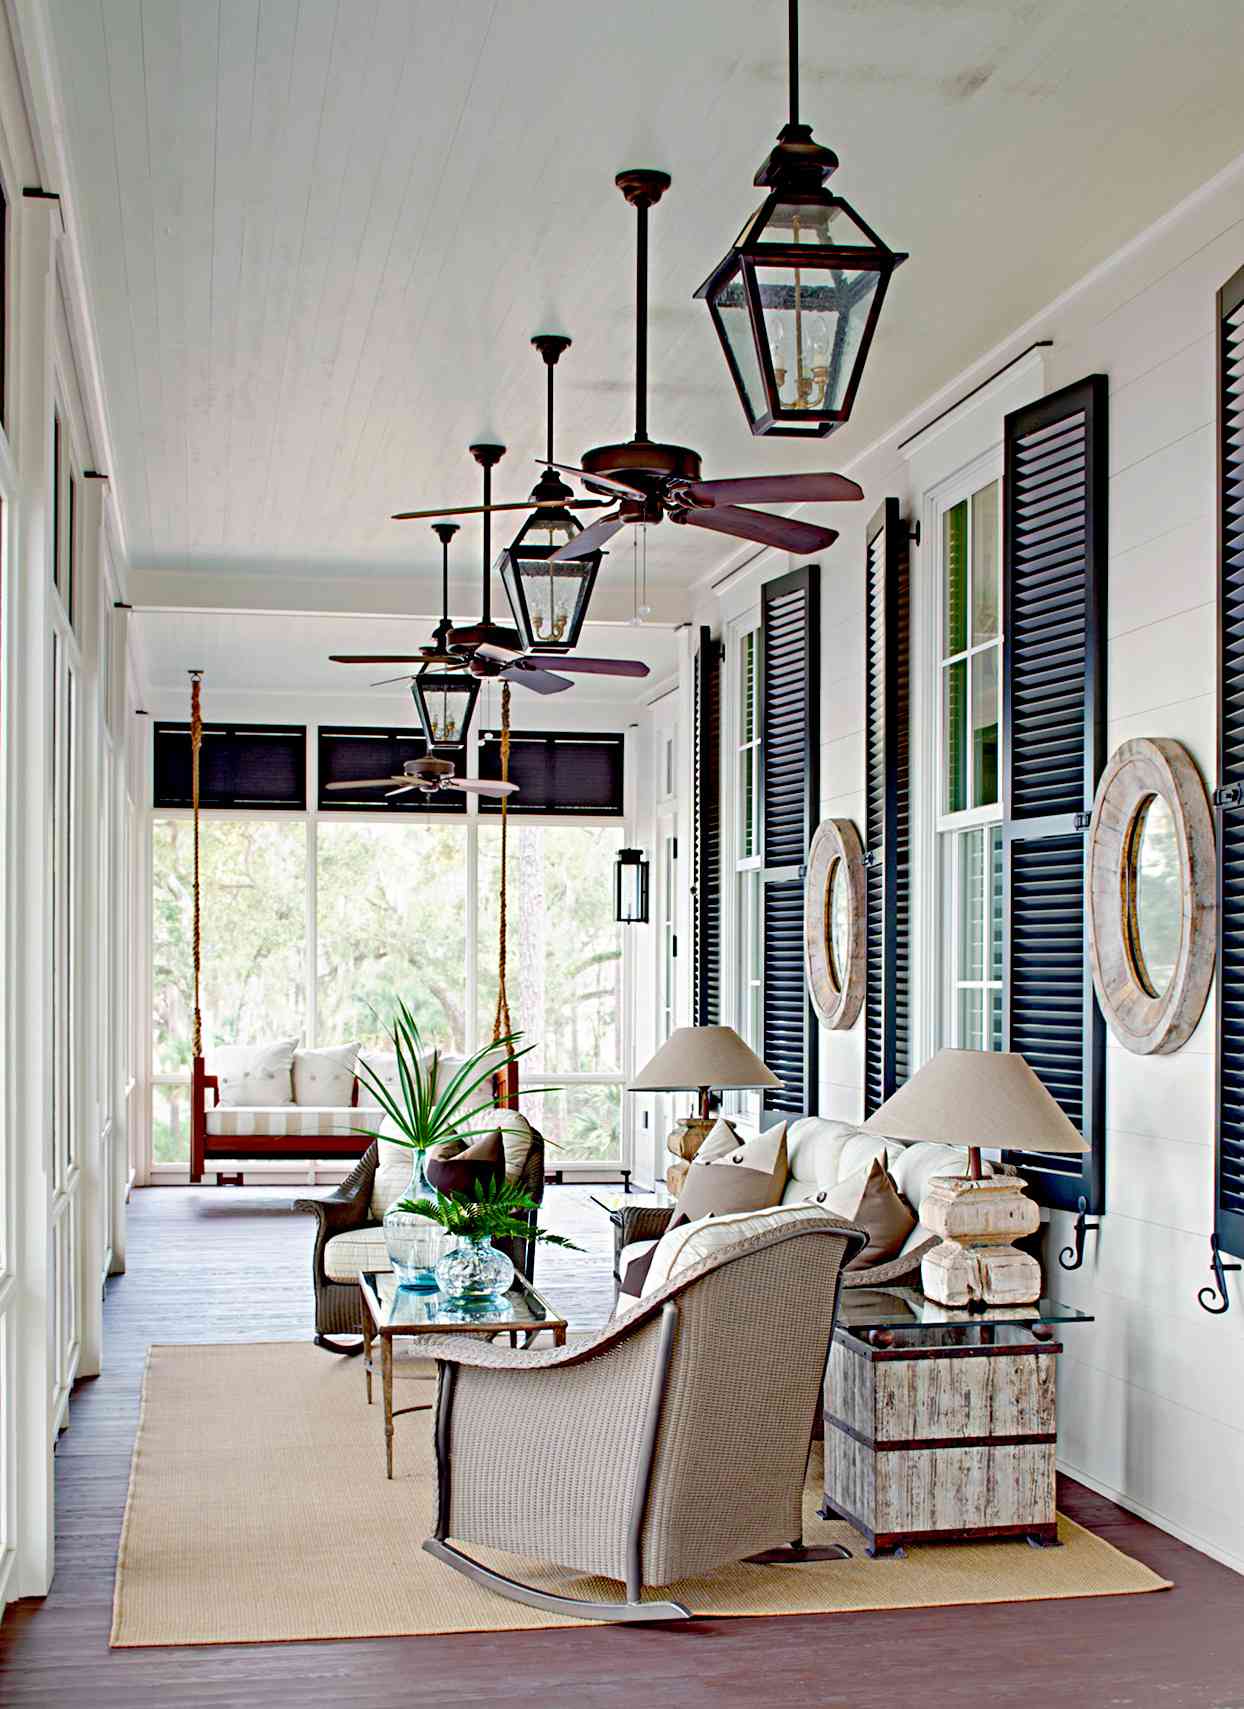 Porch with dining room set, fans